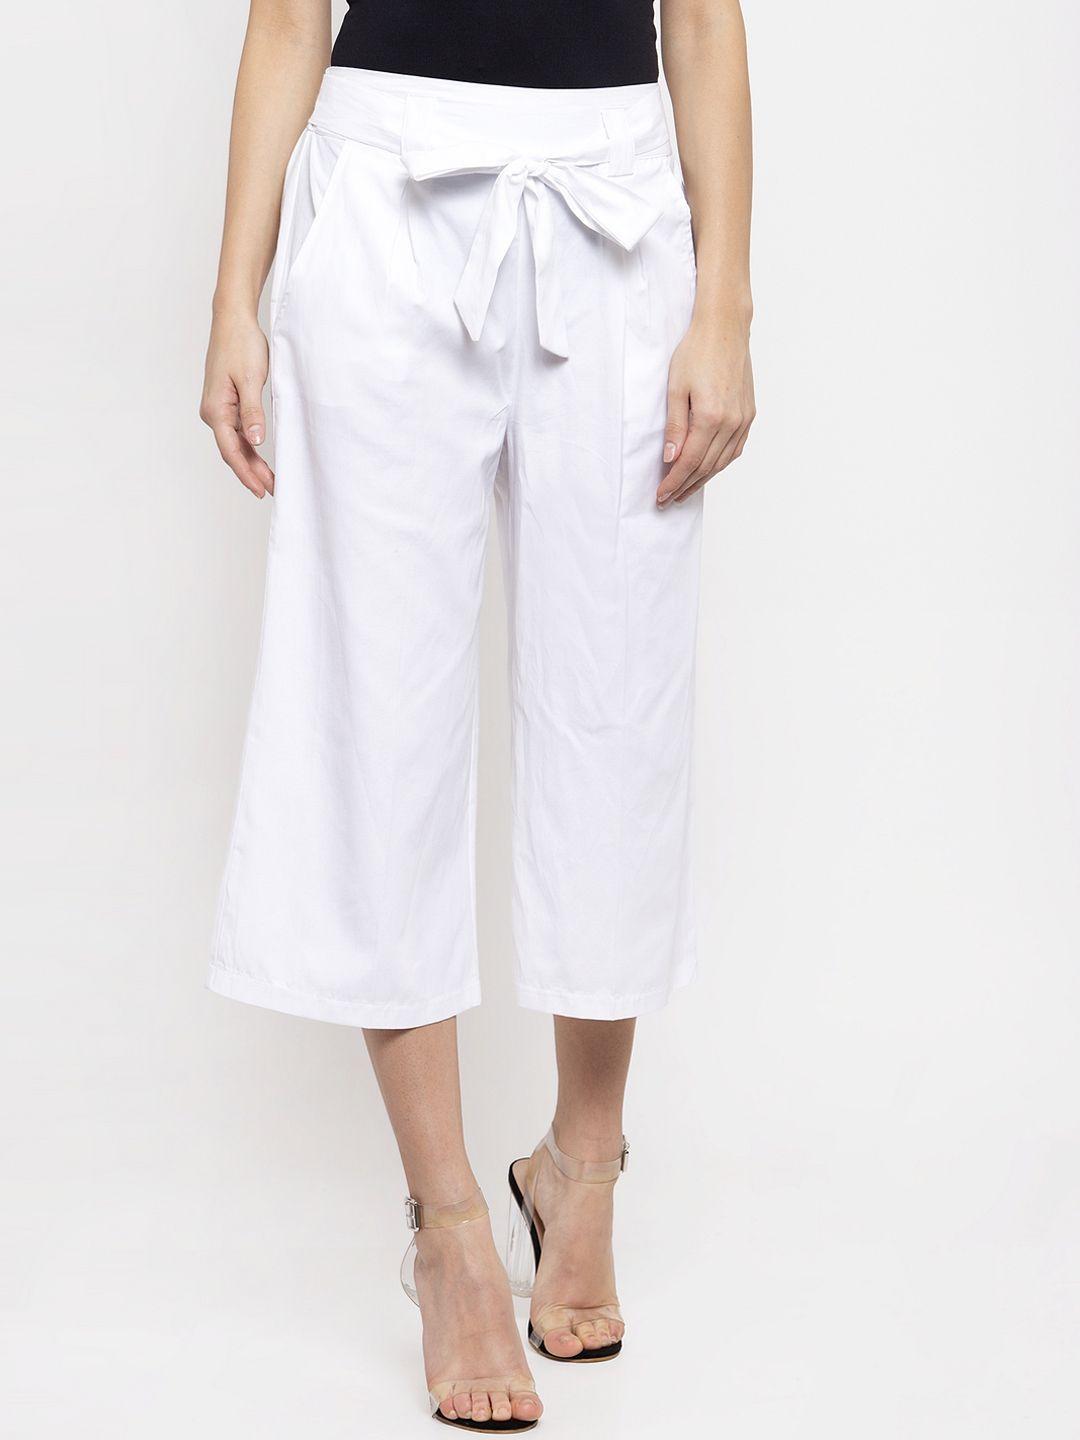 kassually women white regular fit solid culottes